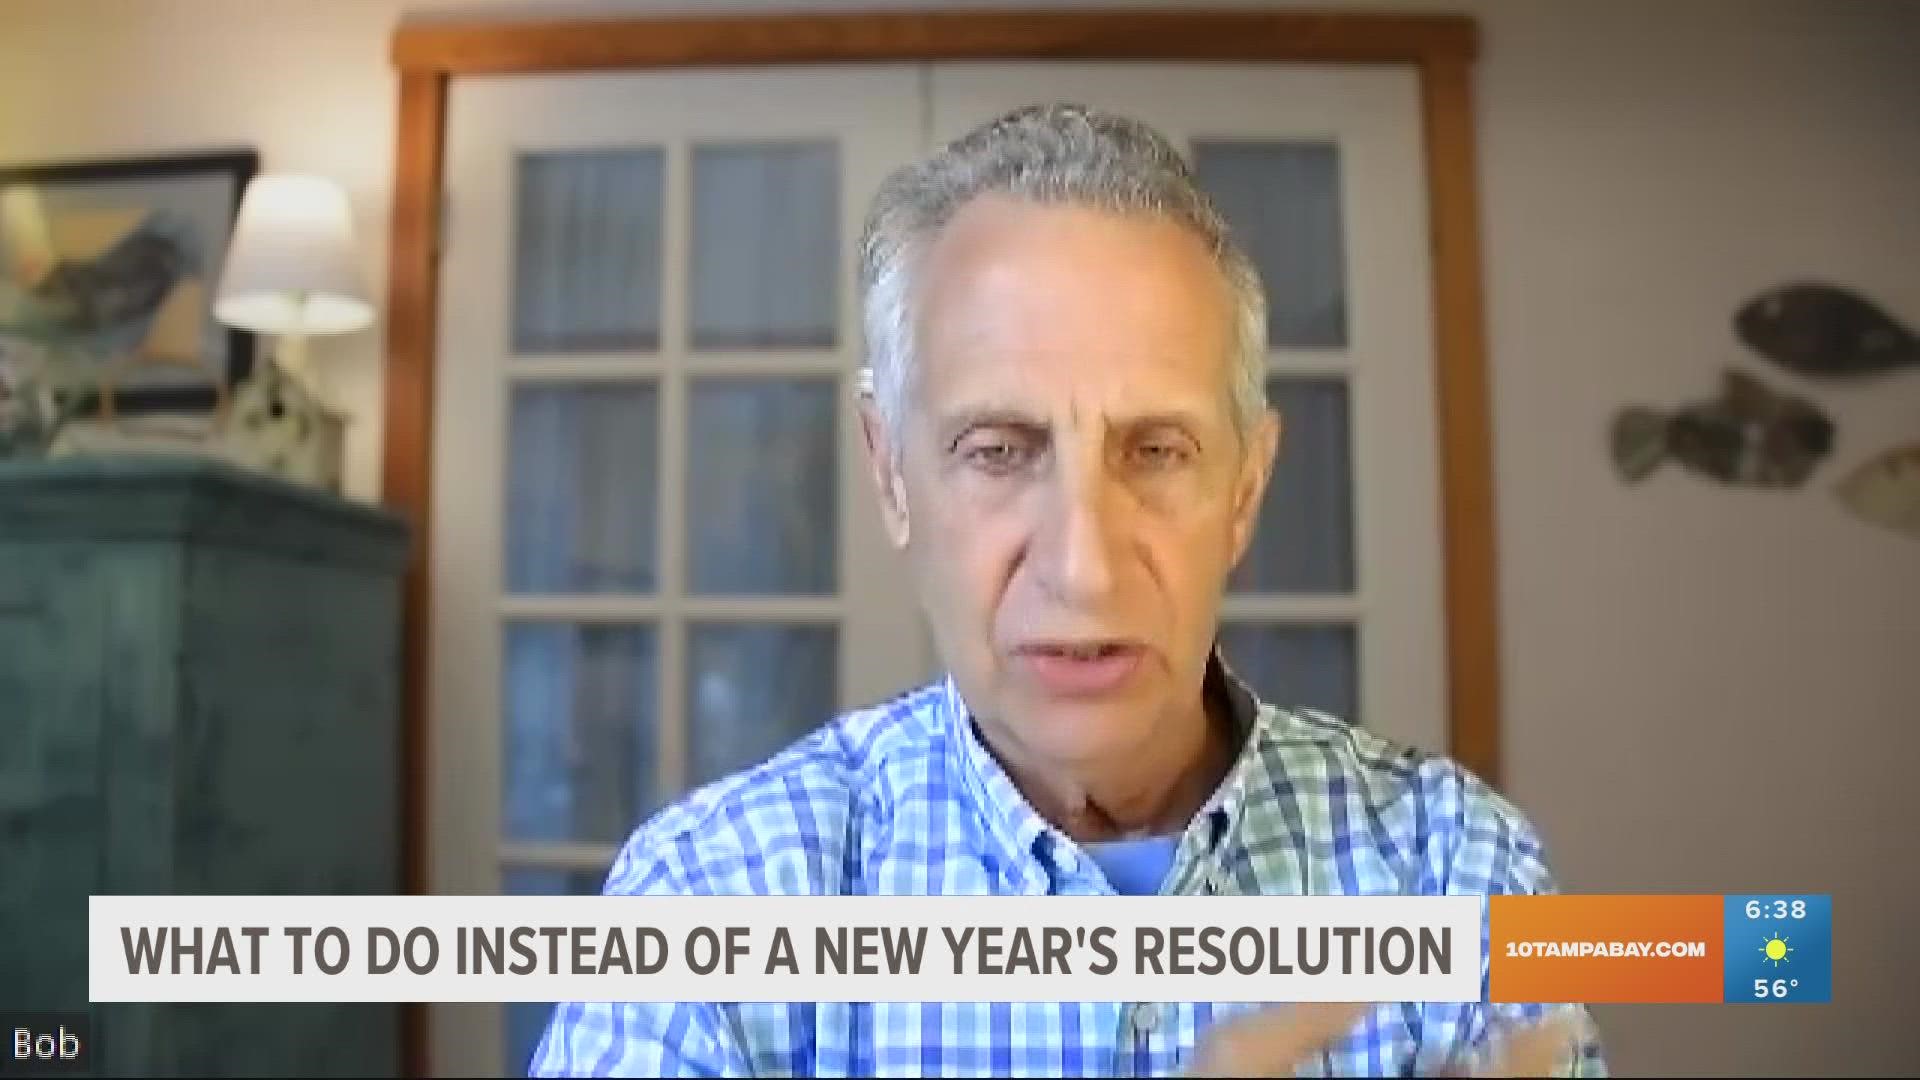 A local mental health counselor says resolutions often lead to little reward.